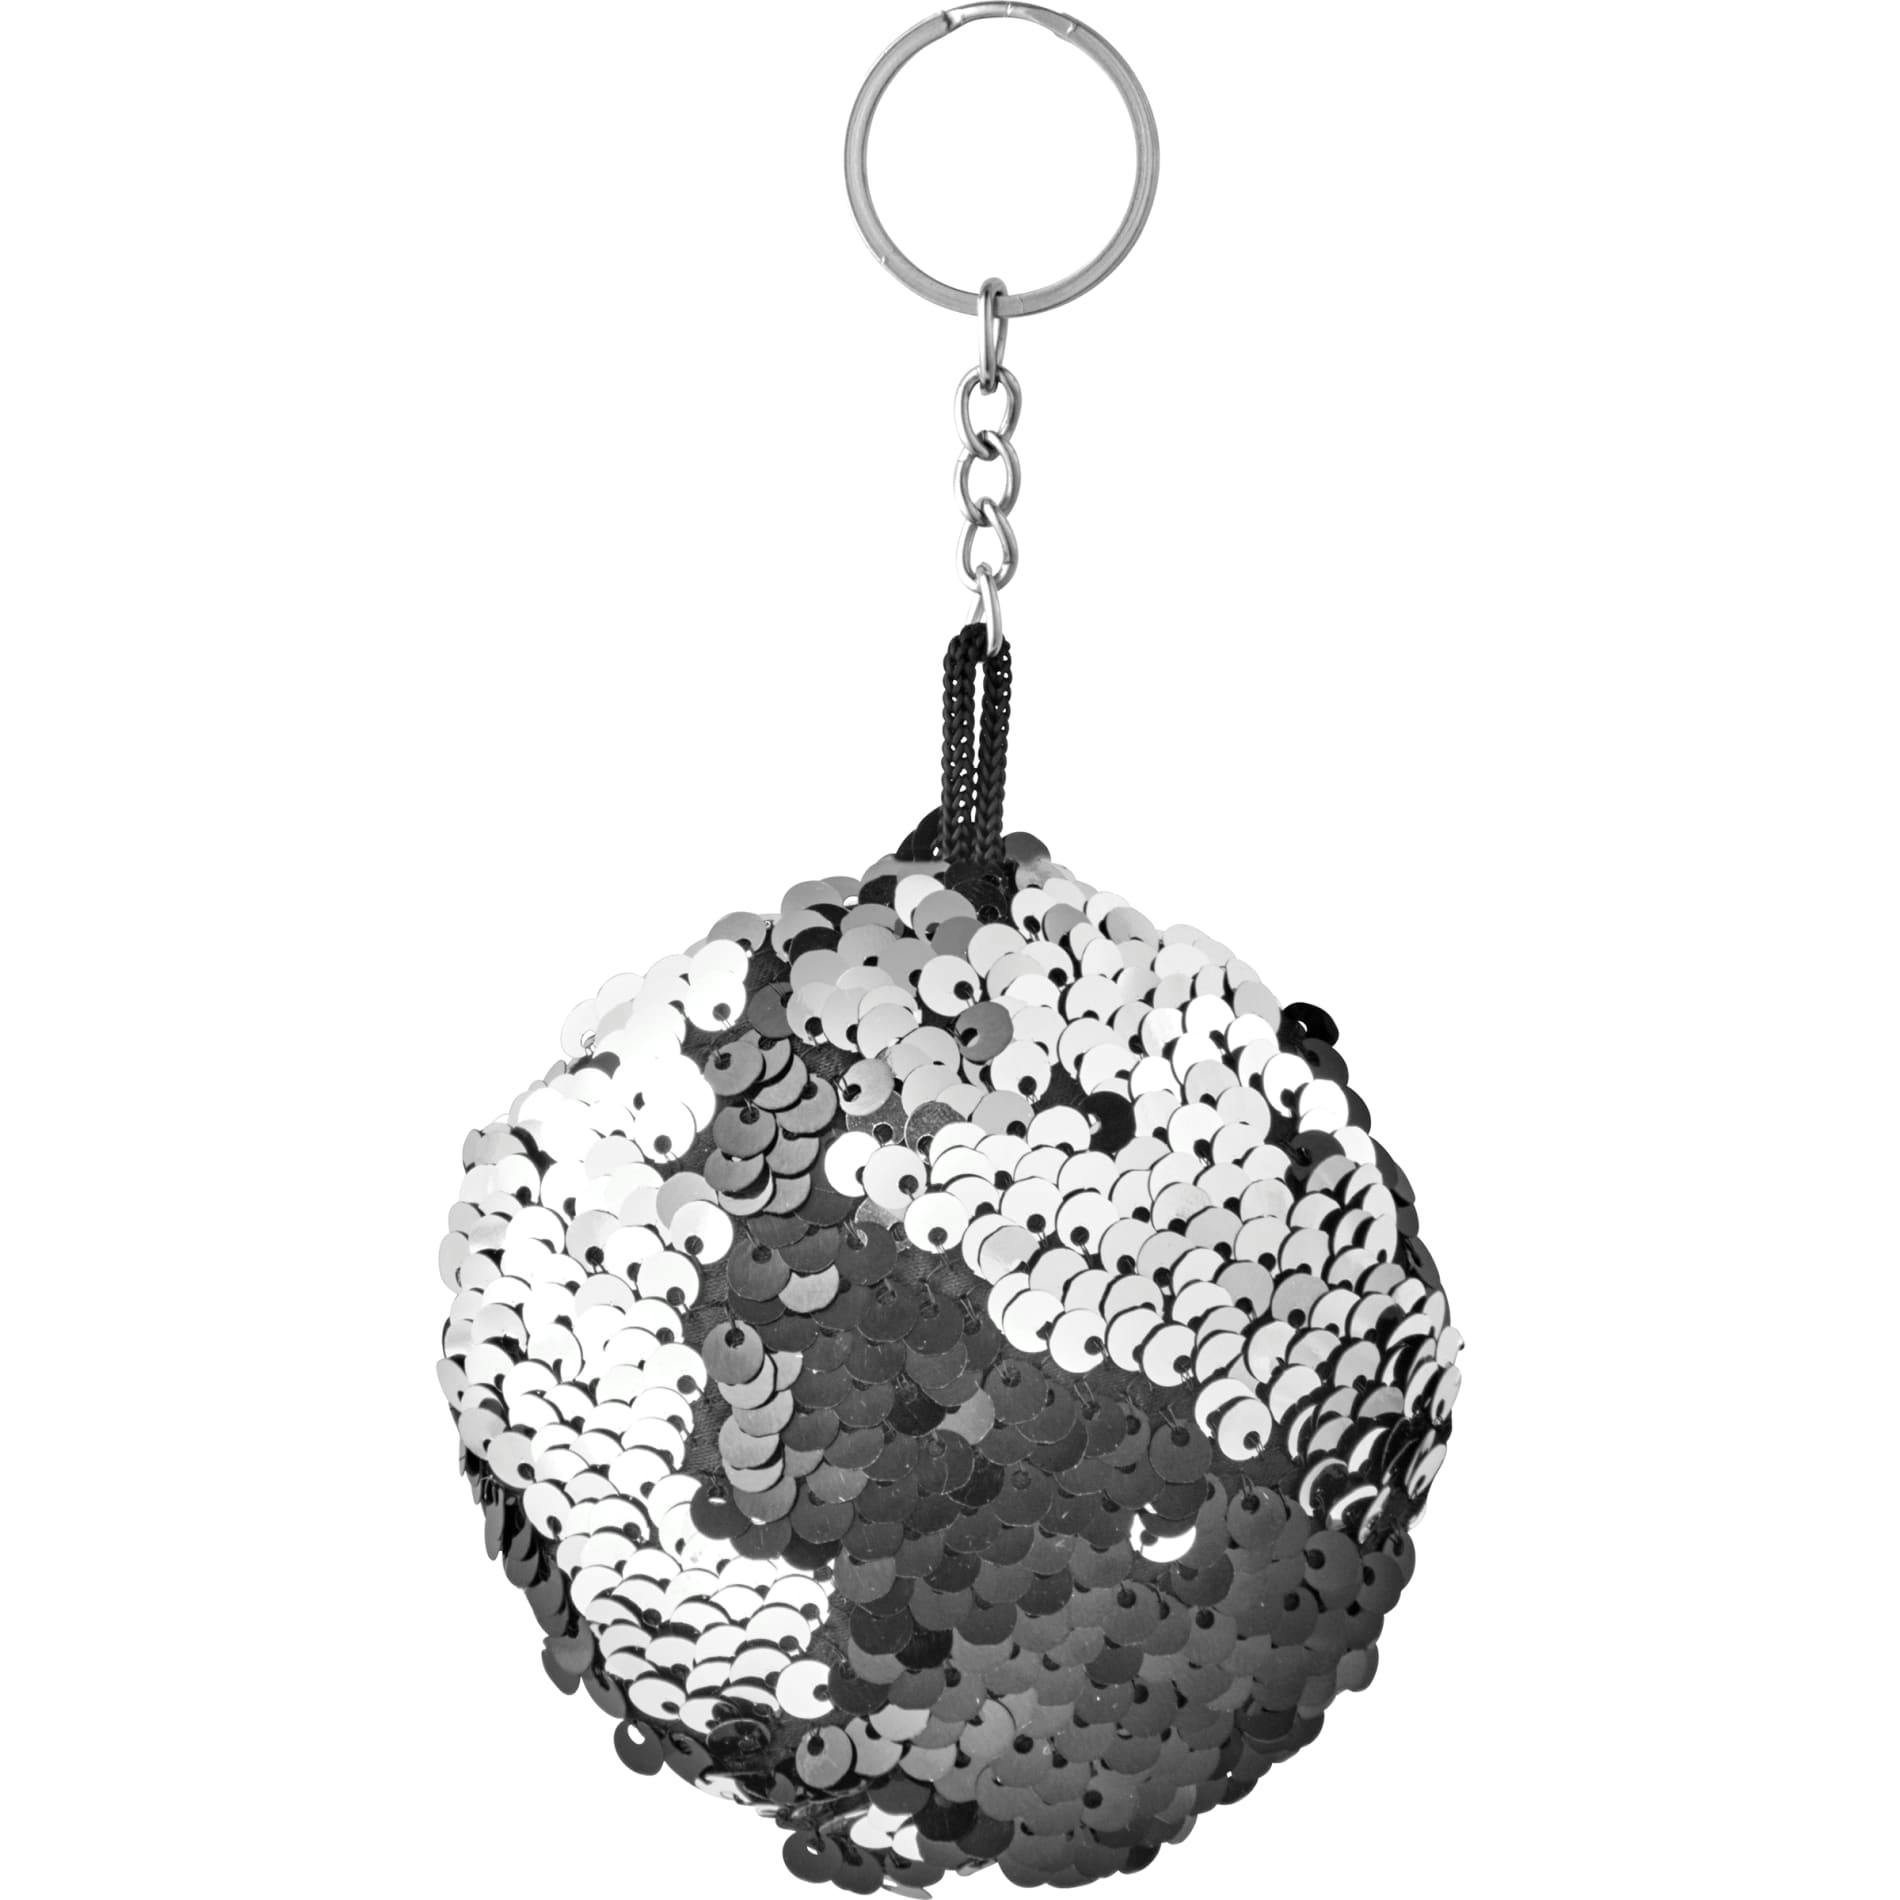 Sequin Keychain - additional Image 1